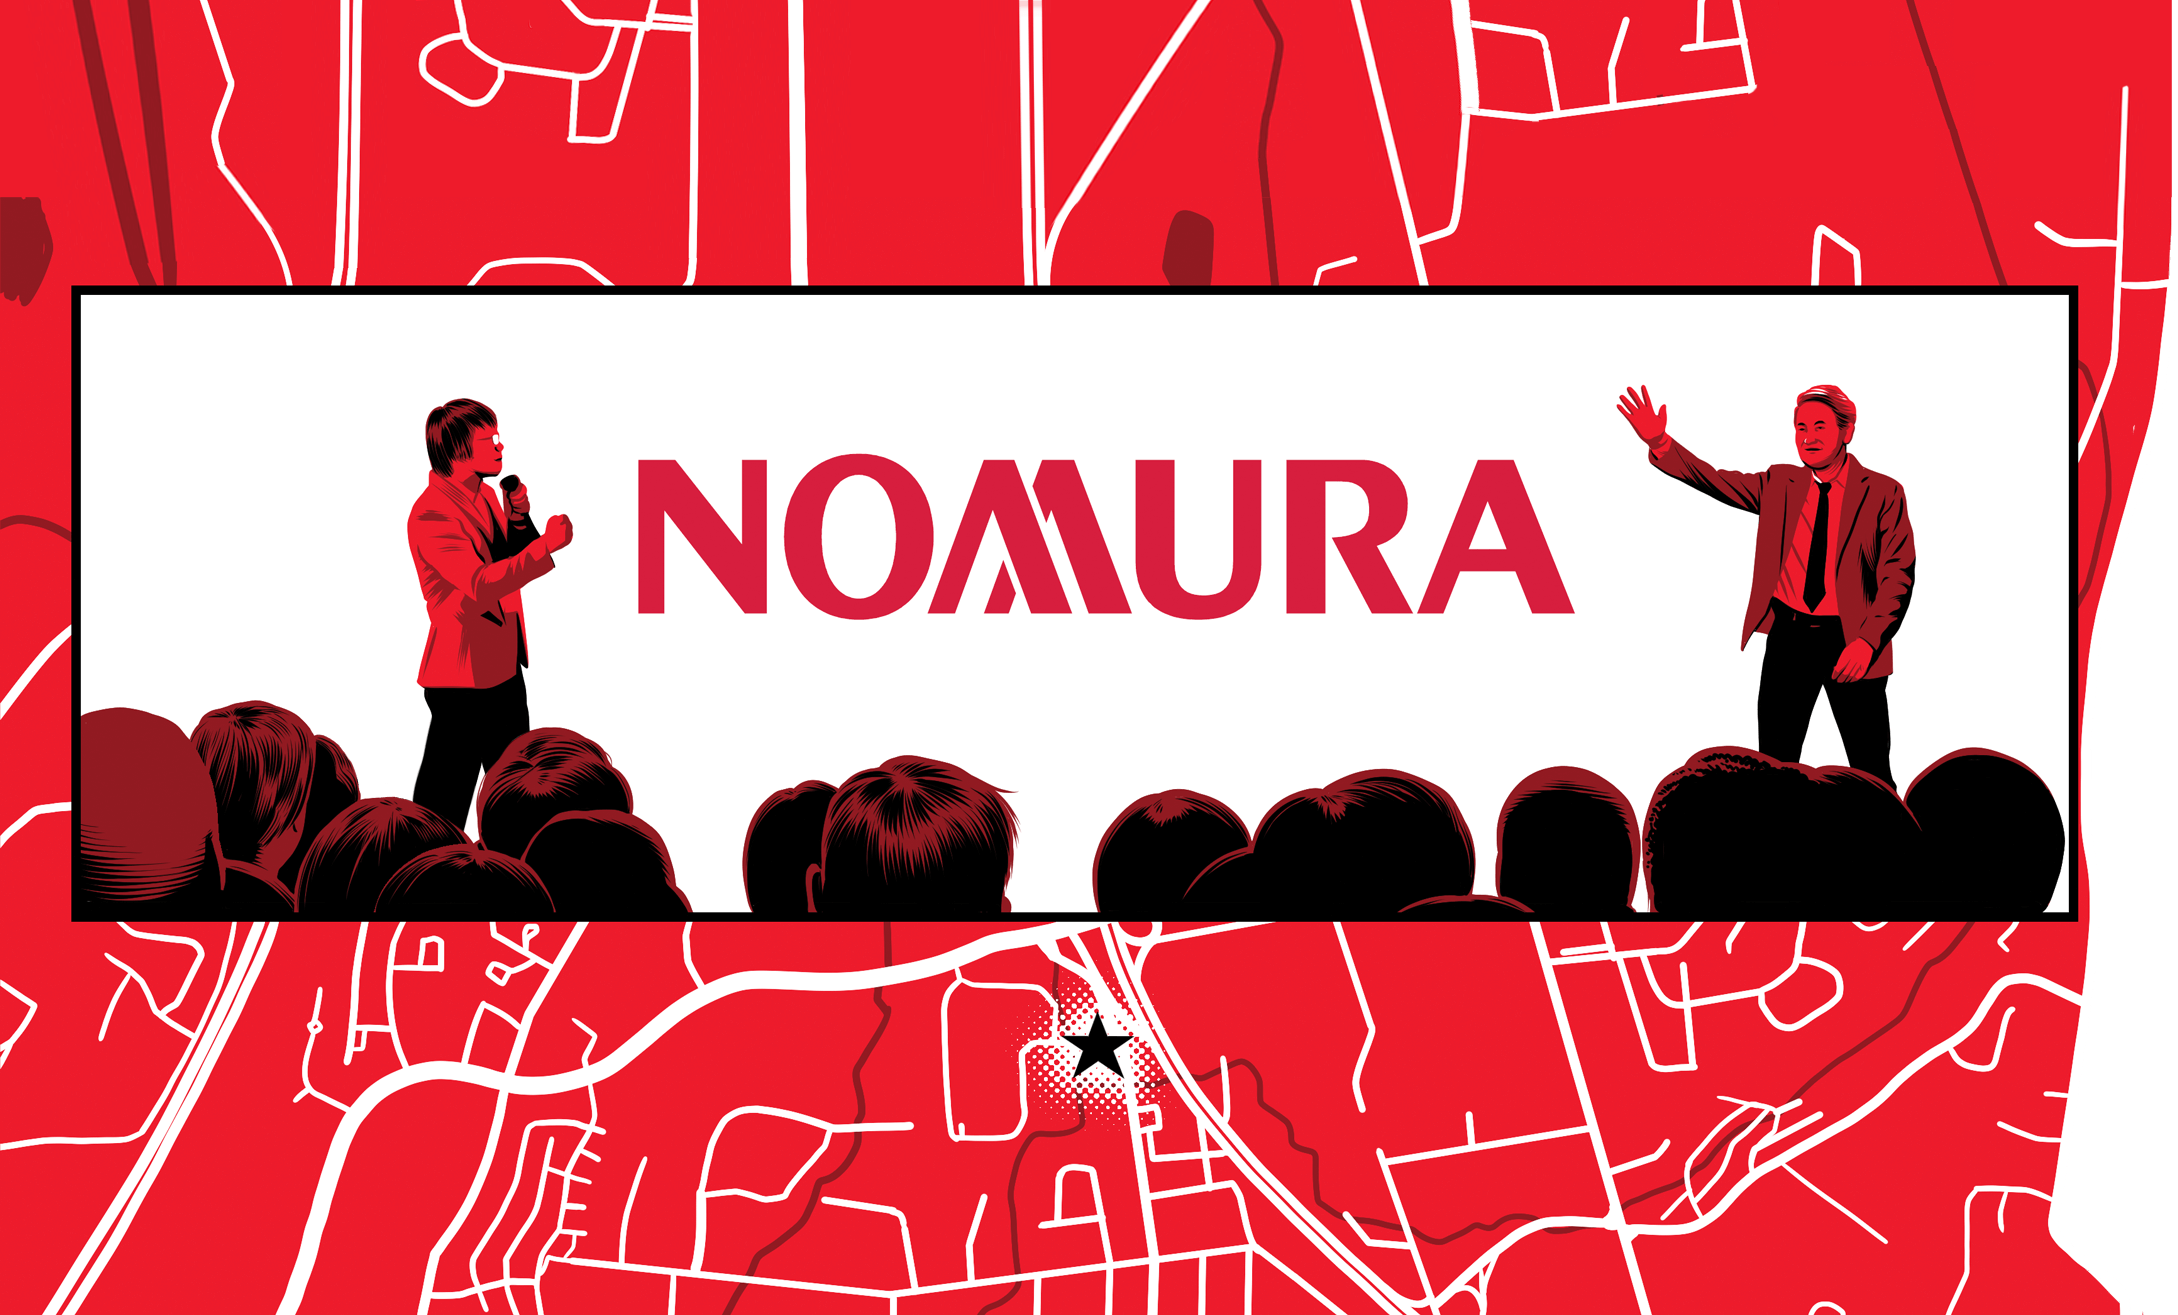 Two executives on a stage with a large Nomura logo as a backdrop. One says: The equity markets are being dramatically reshaped globally as a result of the current environment and the accompanying demand for transparent, agency-driven execution. The other adds: The changes announced today uniquely position Nomura to take advantage of—and evolve with—the new market environment.